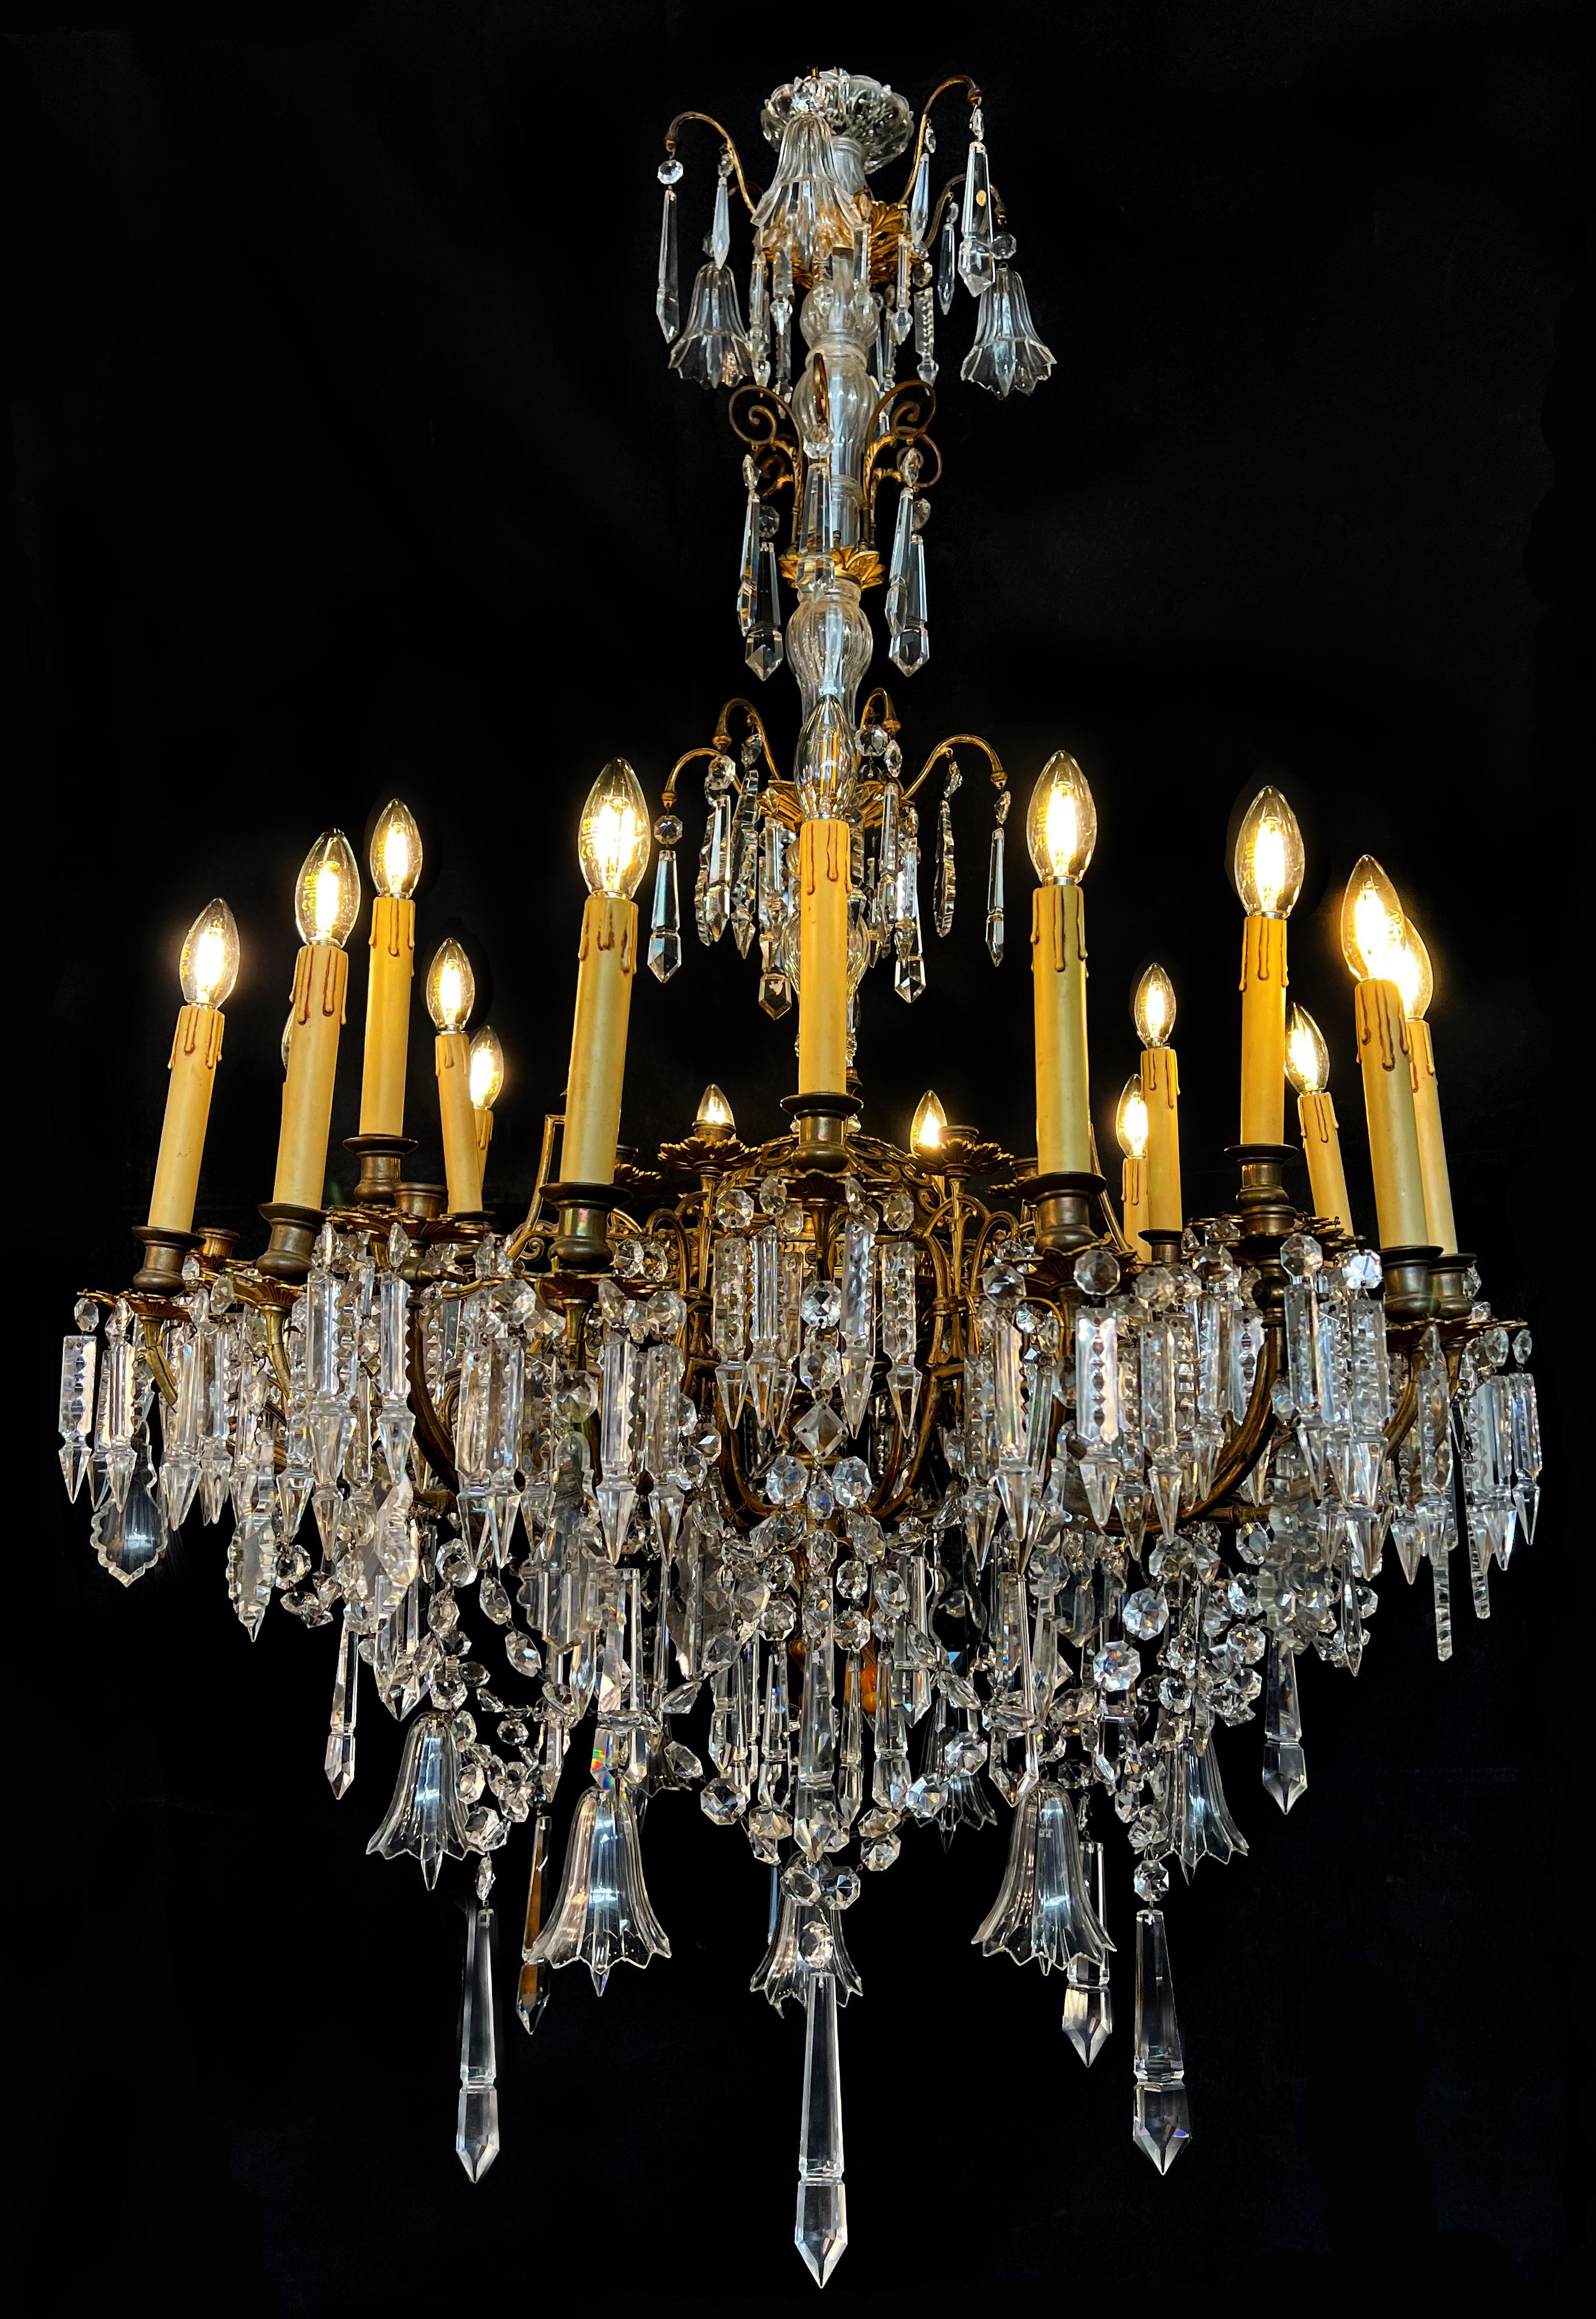 Large bohemian crystal chandelier. It was located in a luxurious apartment across the street from Vienna's Burgtheater.  14 lights illuminating hundreds of sparkling crystals made of pure Bohemia glass. 